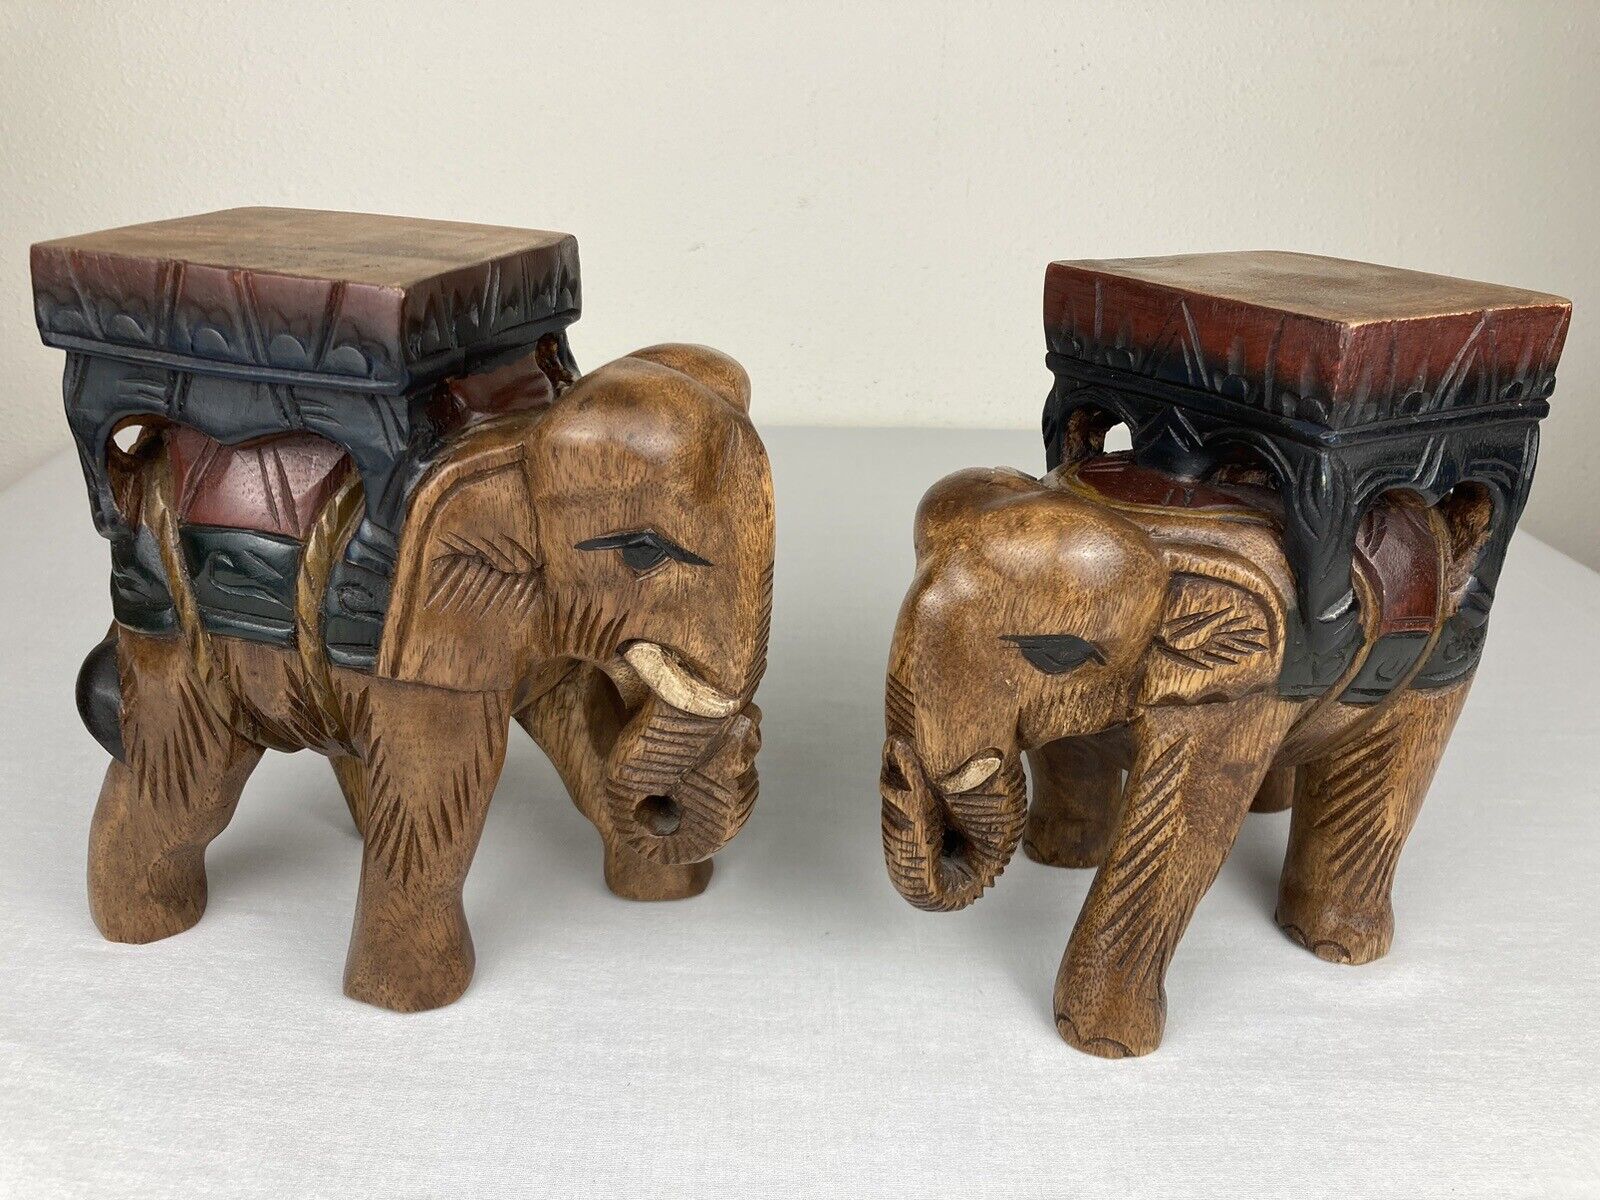 VTG PAIR TEAK ELEPHANT PLANTERS STATUES HAND CARVED SOLID WOOD ANIMALS FIGURES